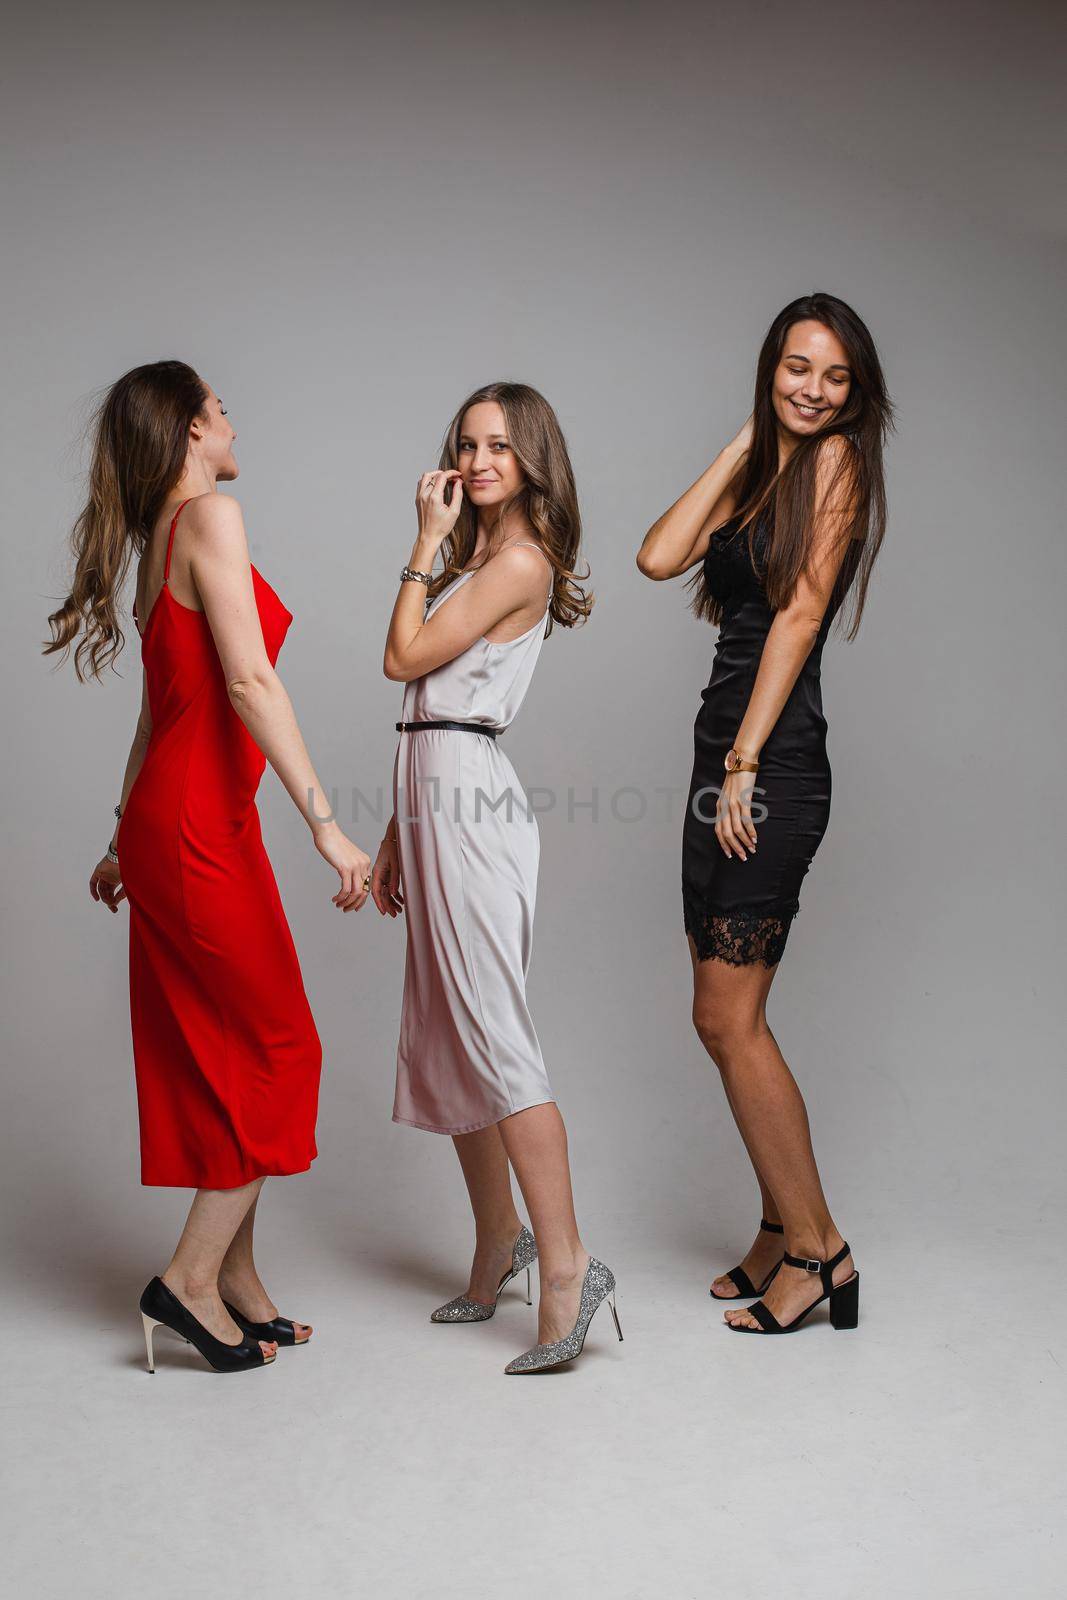 Full length portrait of gorgeous ladies in red, silver and black cocktail dresses and heels laughing all together on white background in studio.